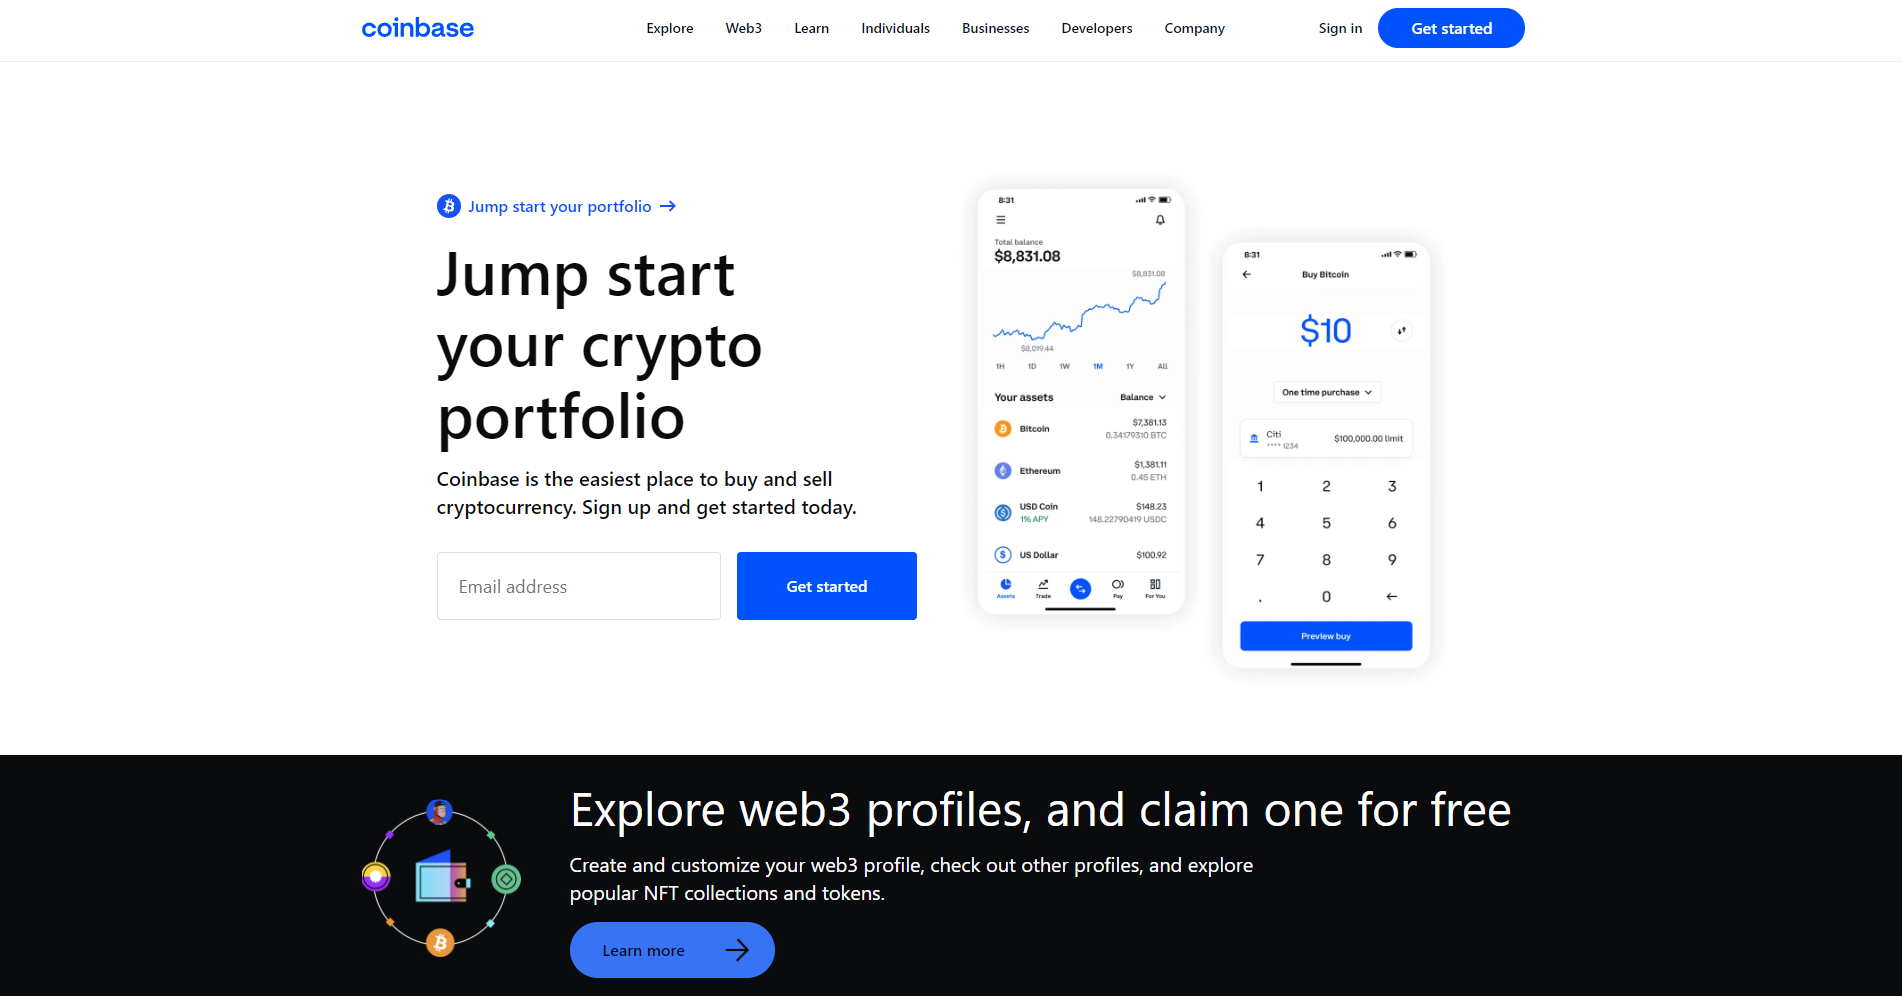 Coinbase Earn now lets users in + countries earn crypto by solving quizzes